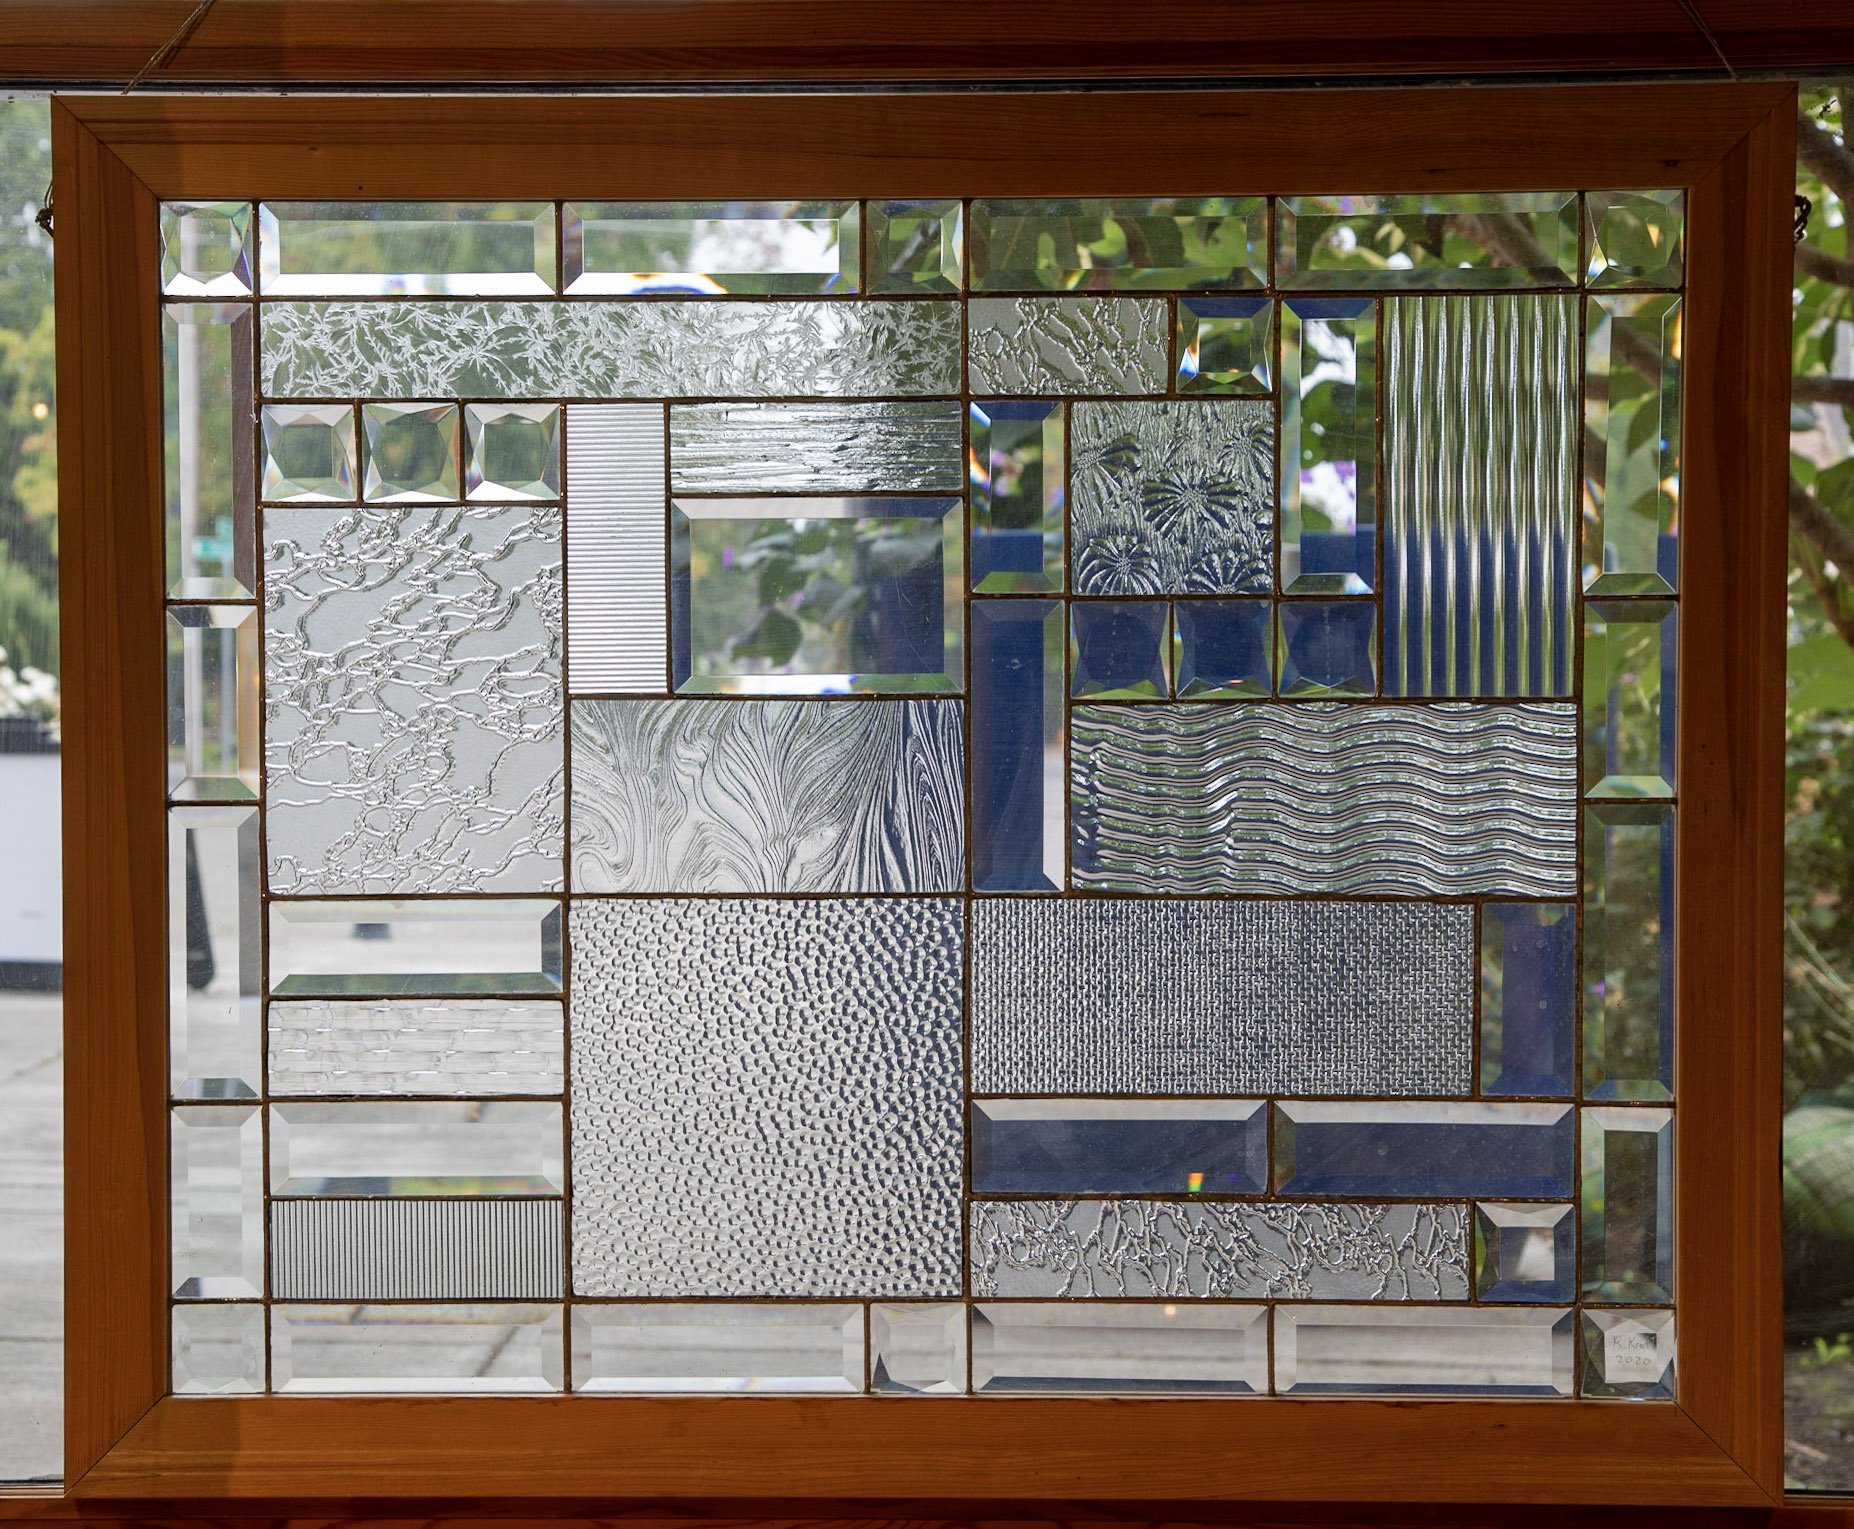 Ralph Kraft, "Crystal Clear," stained glass